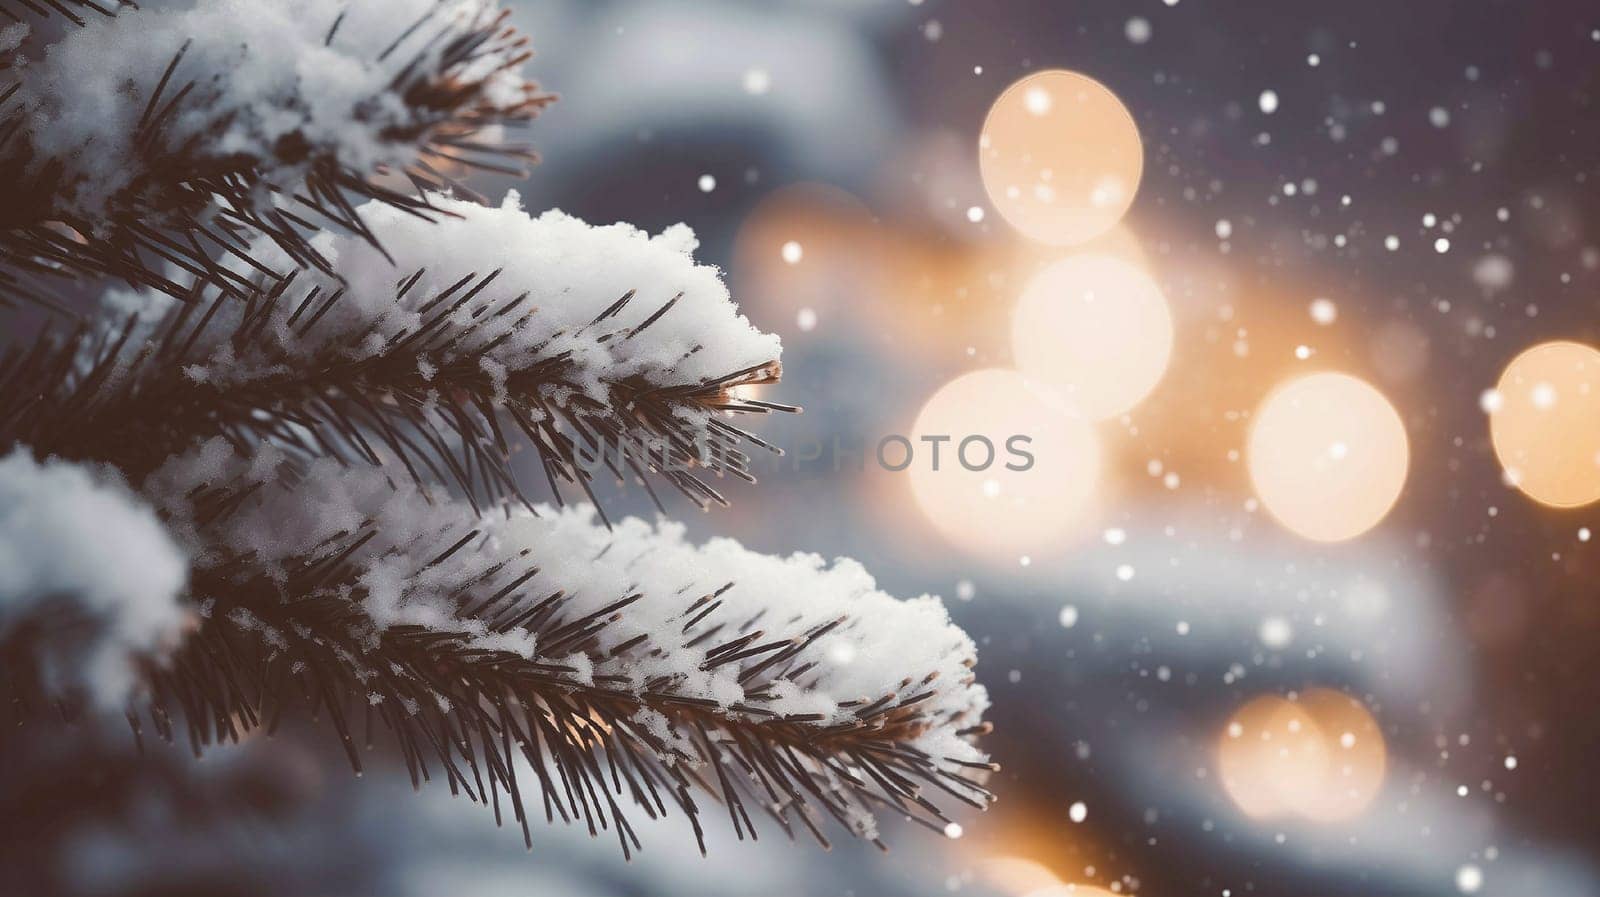 Fir branches in the snow close-up with bokeh. Christmas background with place for your text by kizuneko